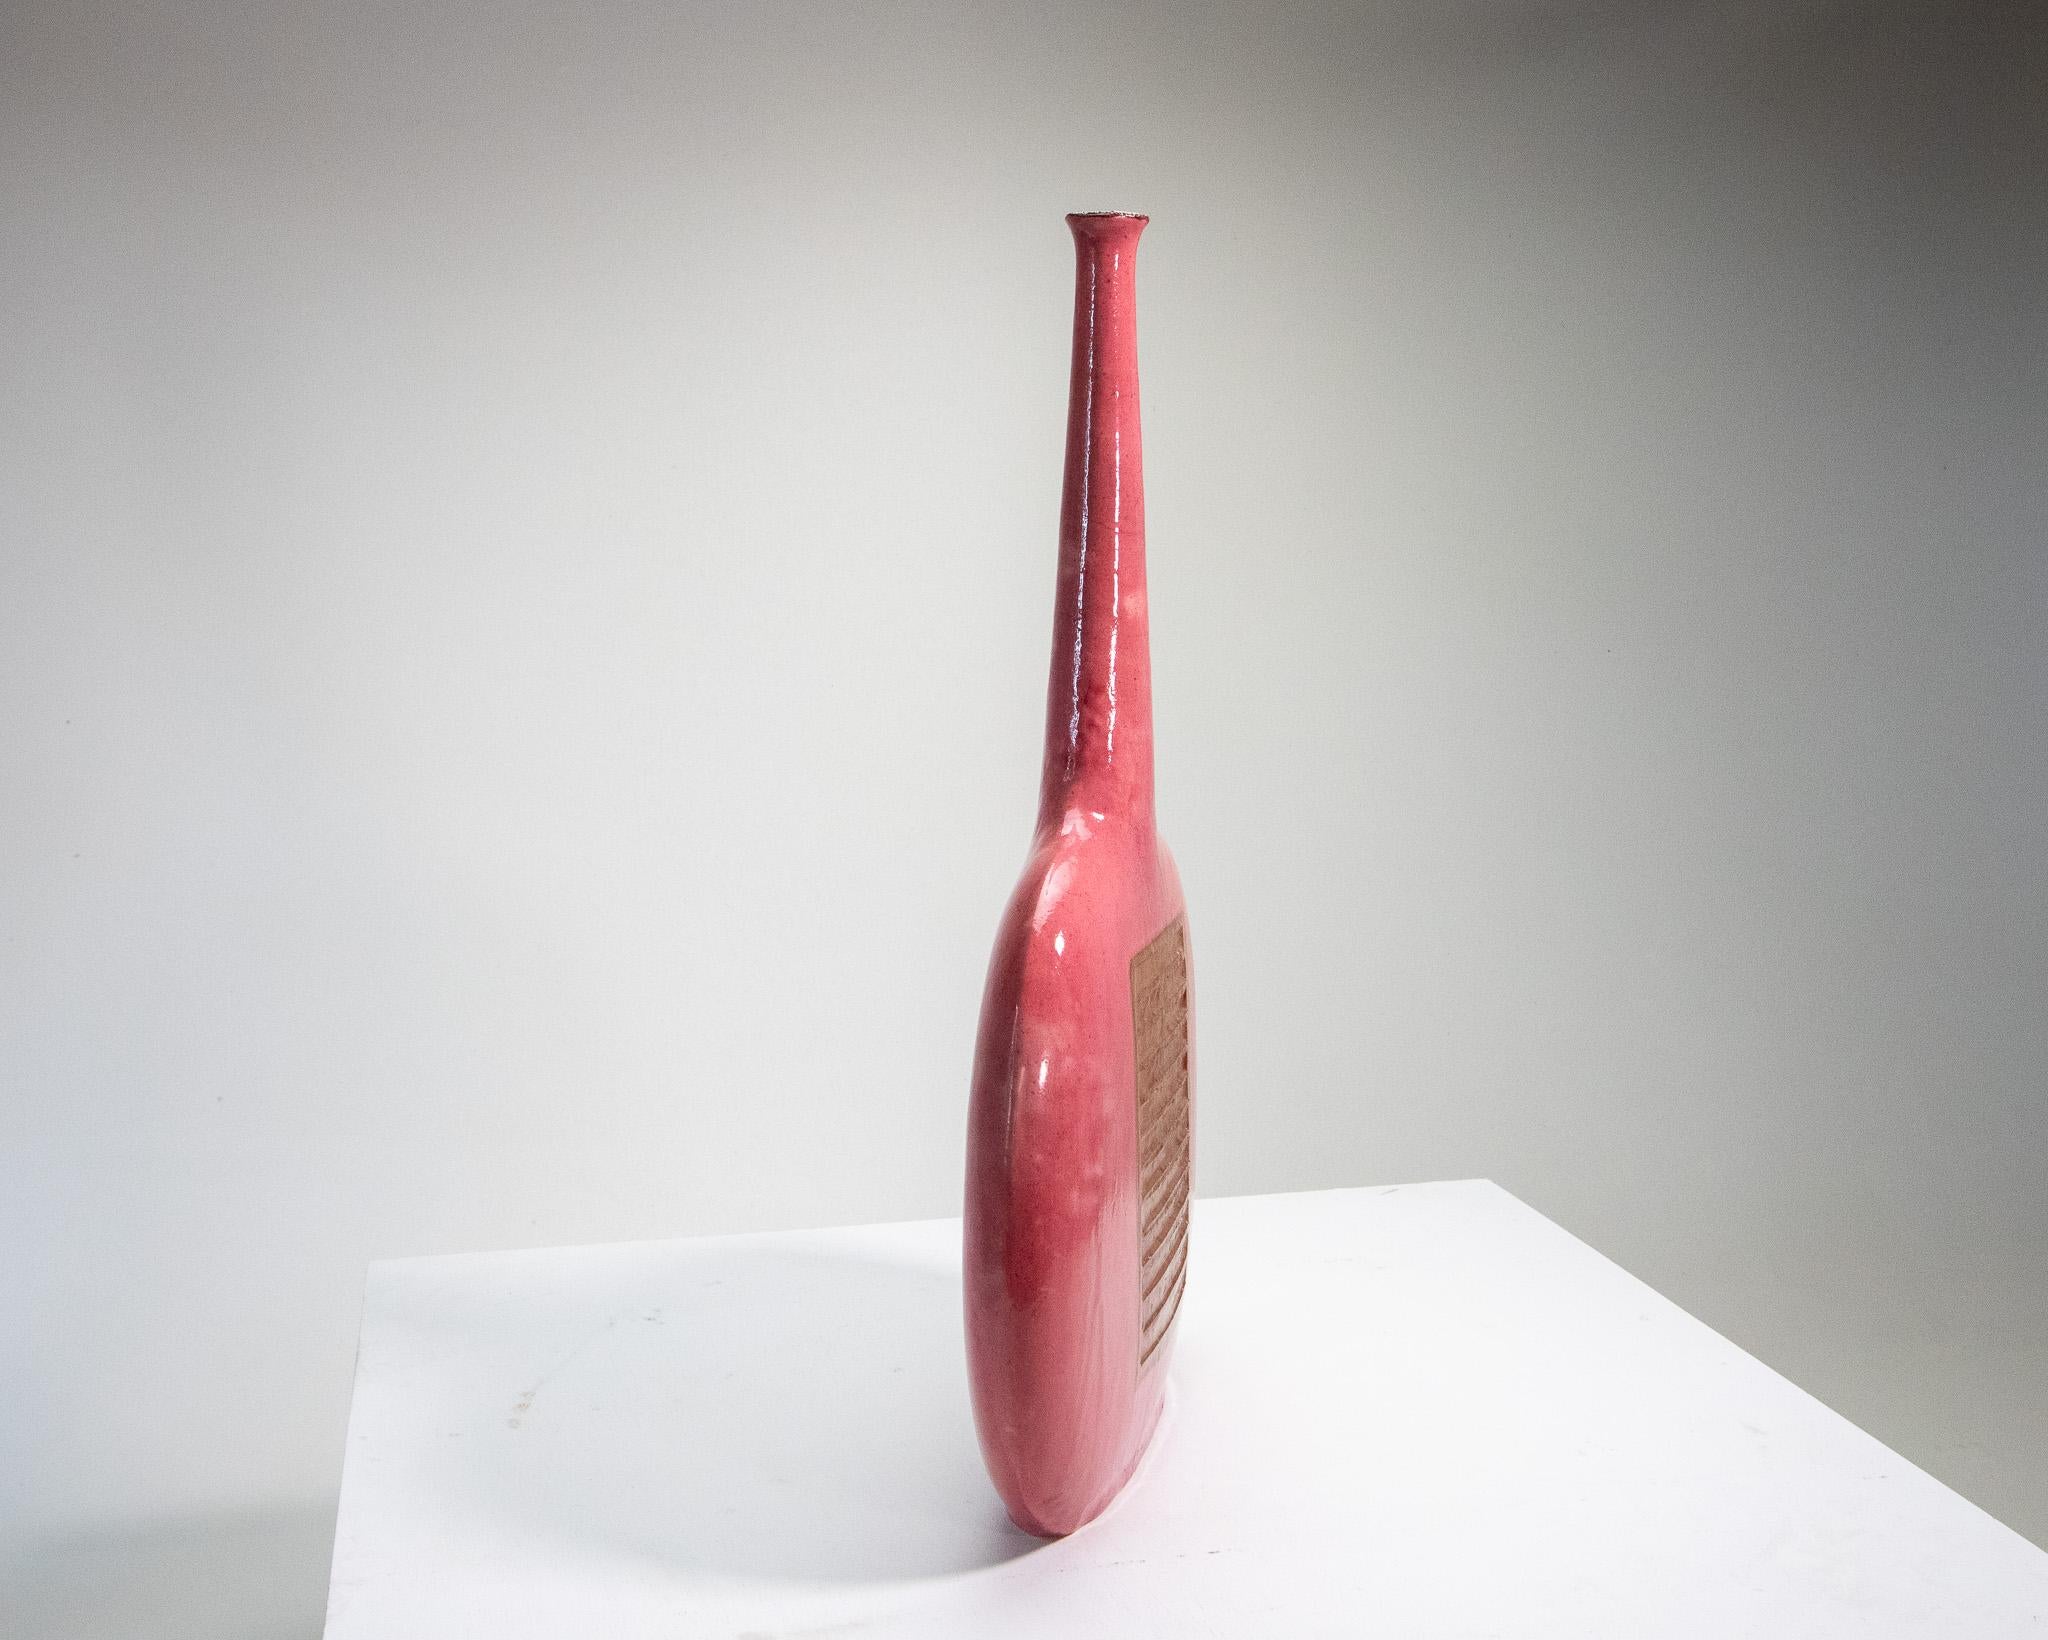 A monumental Italian ceramic vase from Bruno Gambone. C. 1970s. A rare color in hot pink with a neutral toned relief sculpted form in the middle. This is an impressive size at almost 30” tall and 17” wide. Signed Gambone Italy.

Dimensions: 29 1/8”